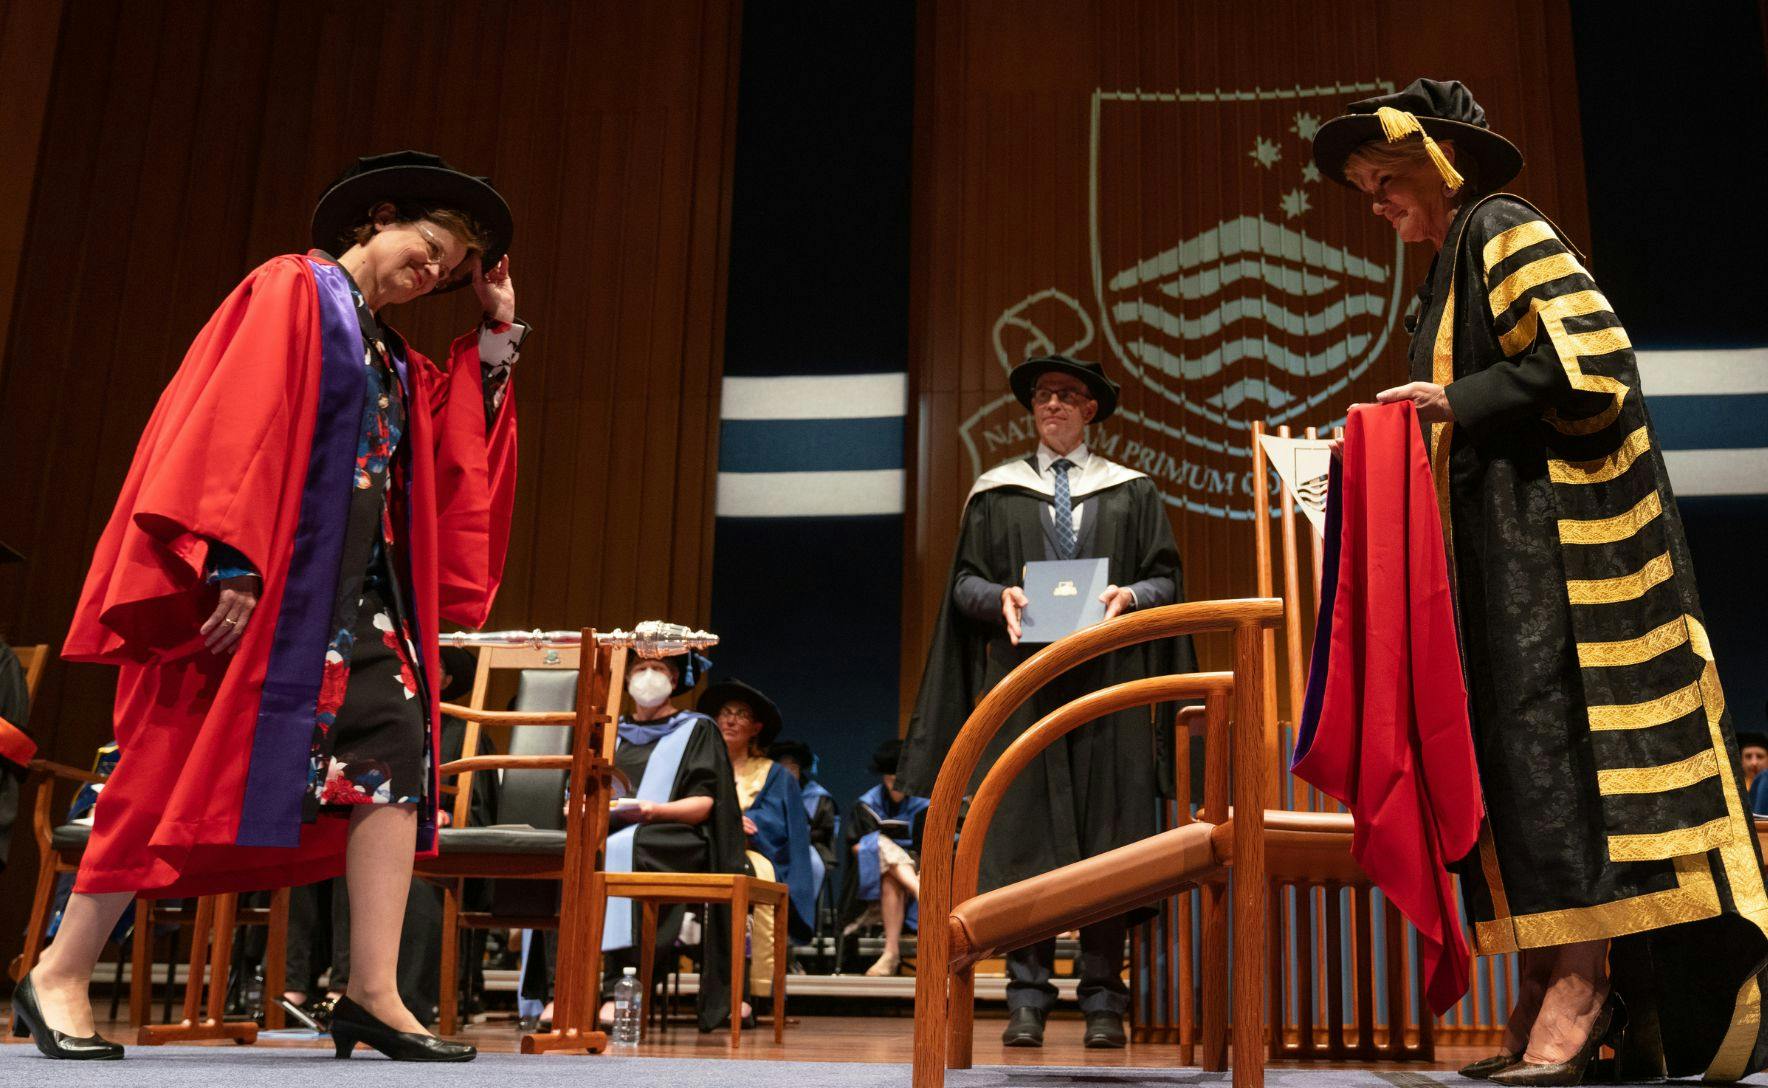 Frances Adamson walks across the stage in her gown to collect an honorary degree from Julie Bishop.